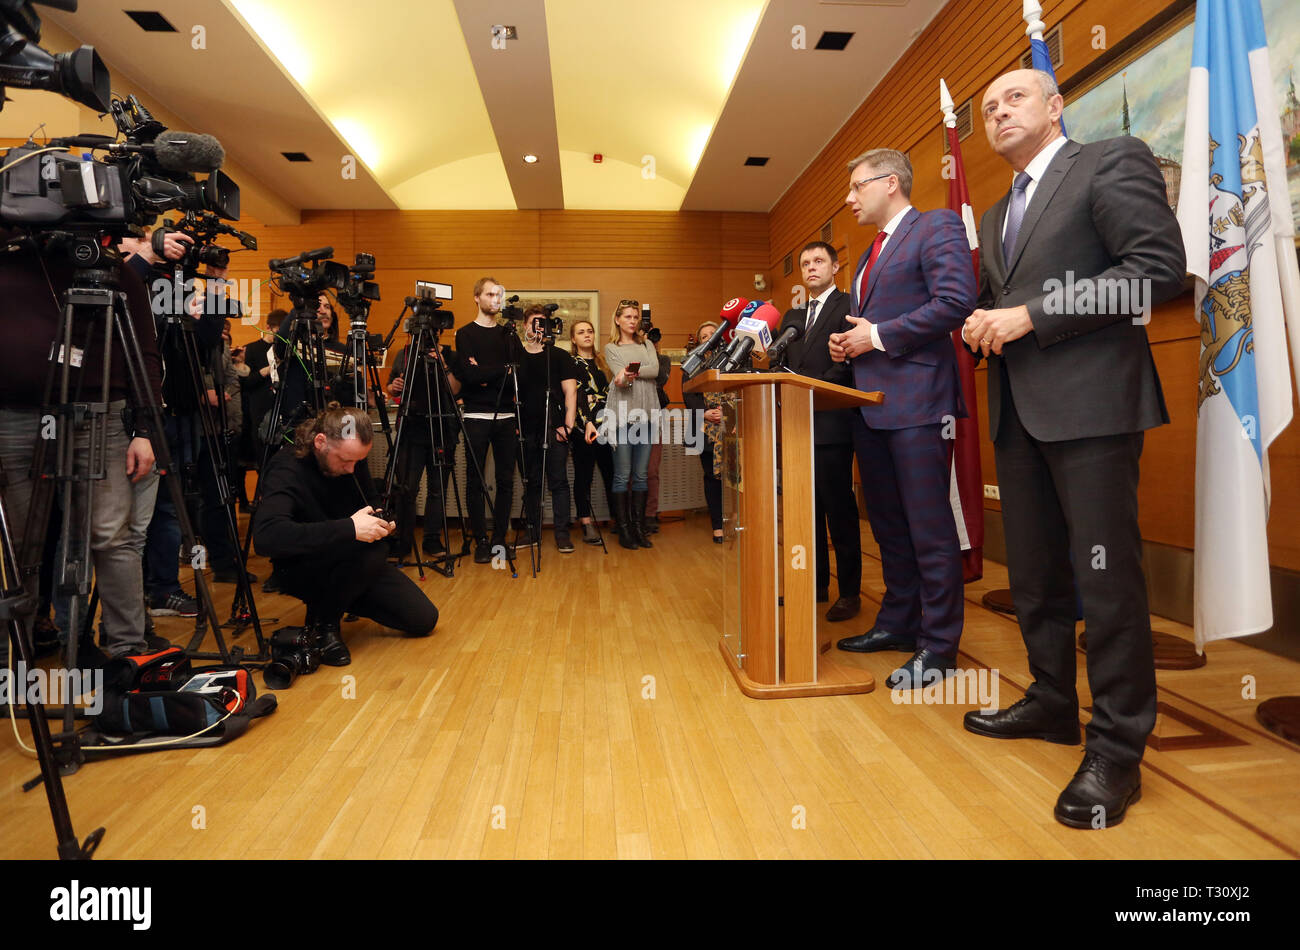 (190405) -- RIGA, April 5, 2019 (Xinhua) -- Nils Usakovs (2nd R) reacts during a press briefing after his dismissal from the post of Riga mayor in Riga, capital of Latvia, April 5, 2019. Latvian Environmental Protection and Regional Development Minister Juris Puce sacked Riga mayor Nils Usakovs on Friday, blaming him for a failure to prevent serious illegalities in the Latvian capital's municipal transport company. The mayor lost his job for not performing his office duties as prescribed by law and for several violations, according to the minister's decree published in the official newspap Stock Photo